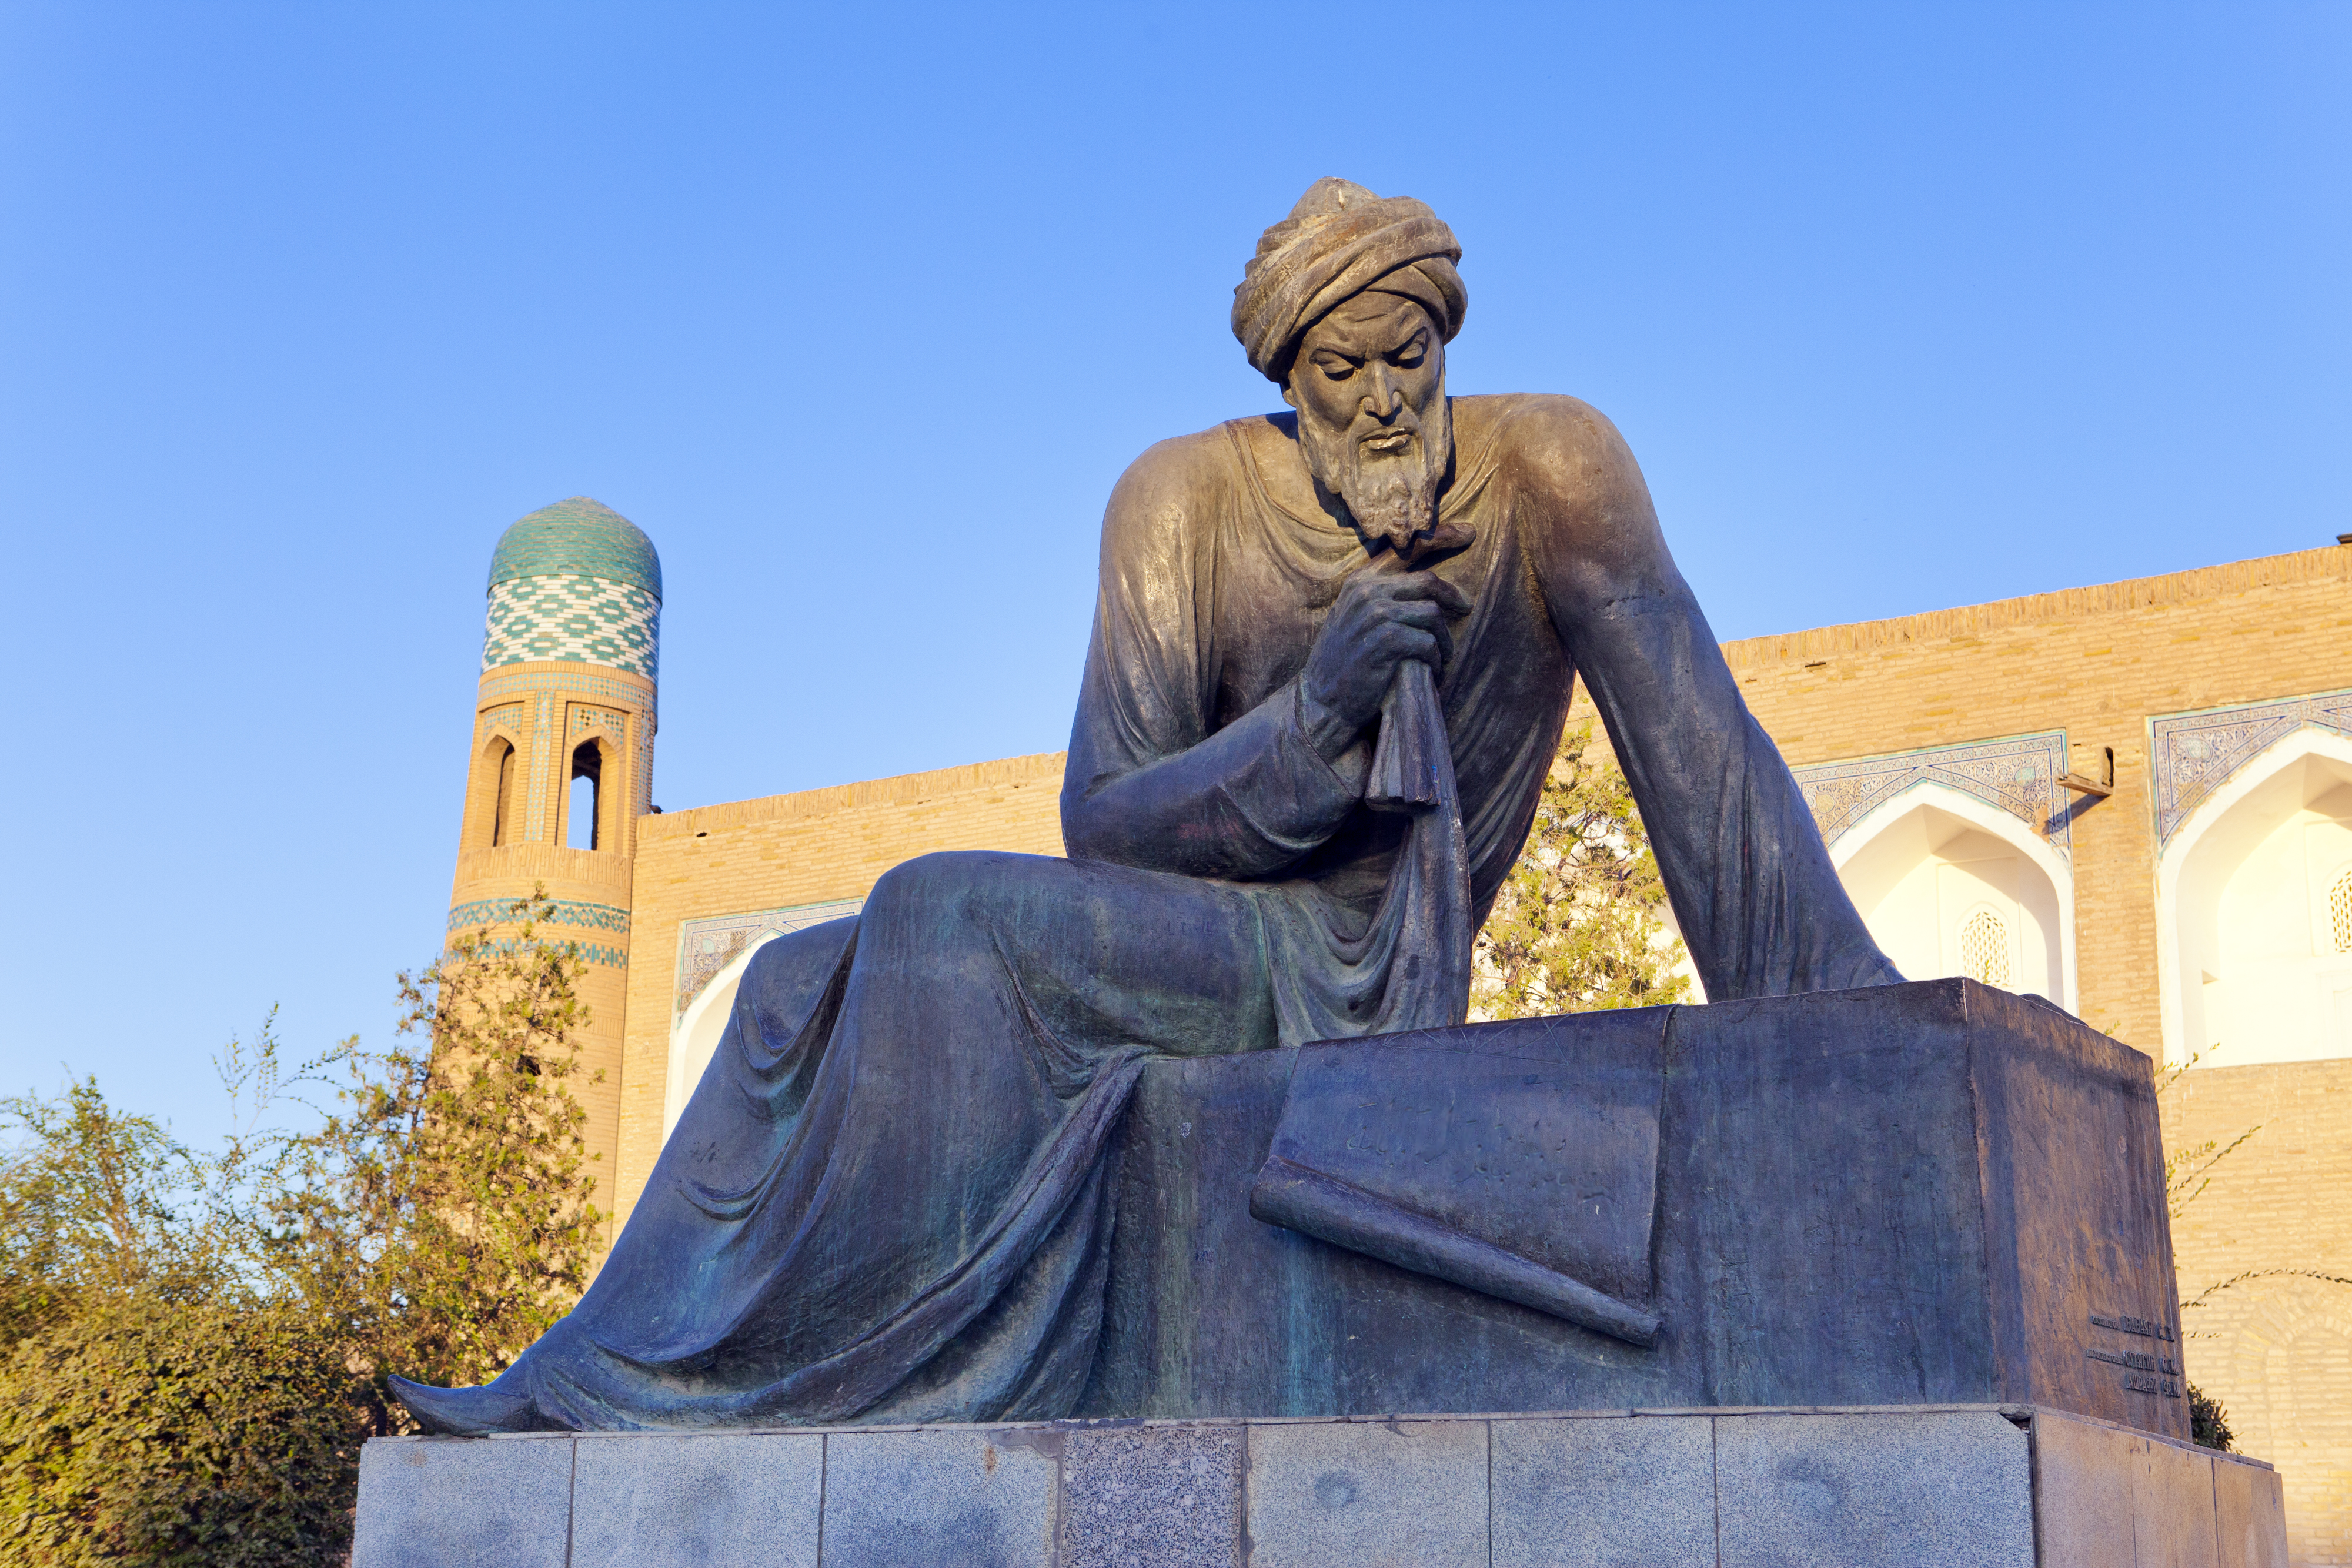 Islam's Prohibition of Drawing Images and Erecting Statues - IslamiCity